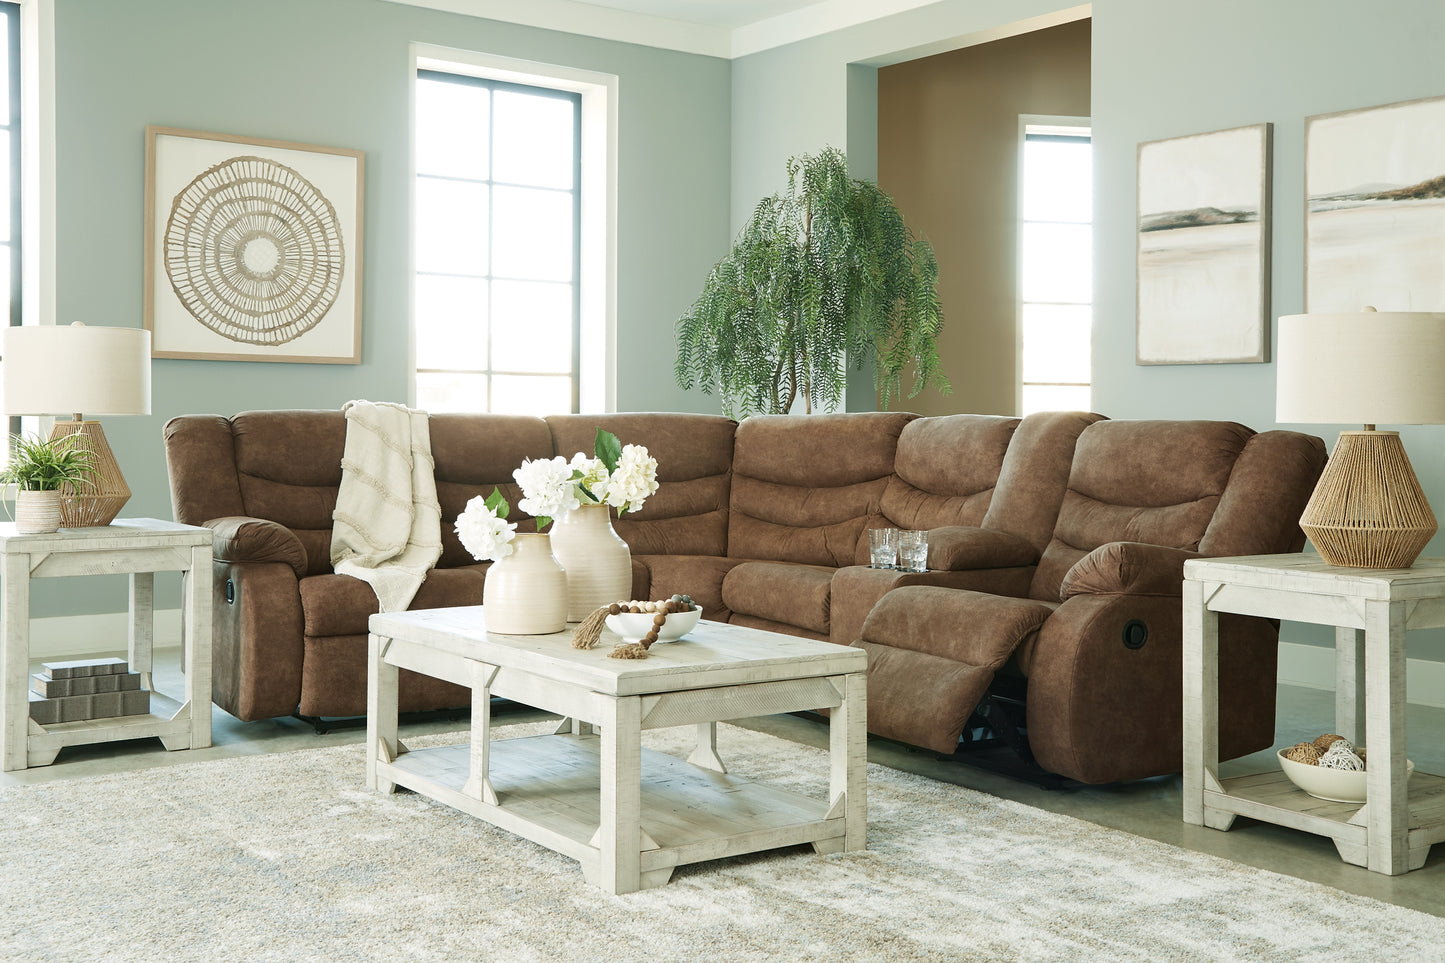 Partymate 2-Piece Reclining Sectional Signature Design by Ashley®